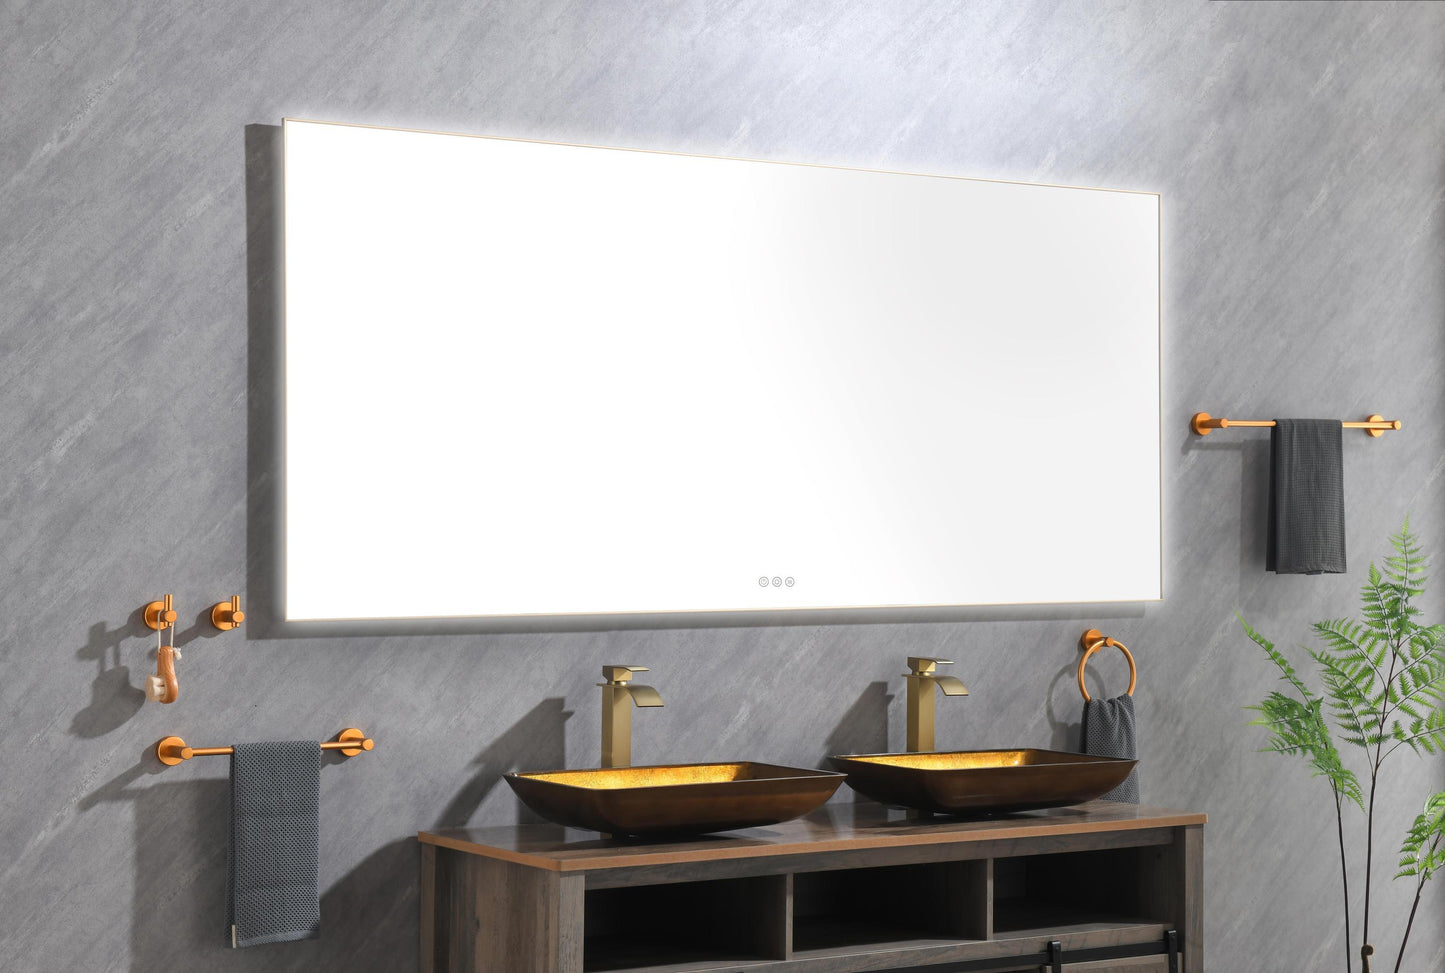 LTL needs to consult the warehouse addressSuper Bright Led Bathroom Mirror with Lights, Metal Frame Mirror Wall Mounted Lighted Vanity Mirrors for Wall, Anti Fog Dimmable Led Mirror for Makeup